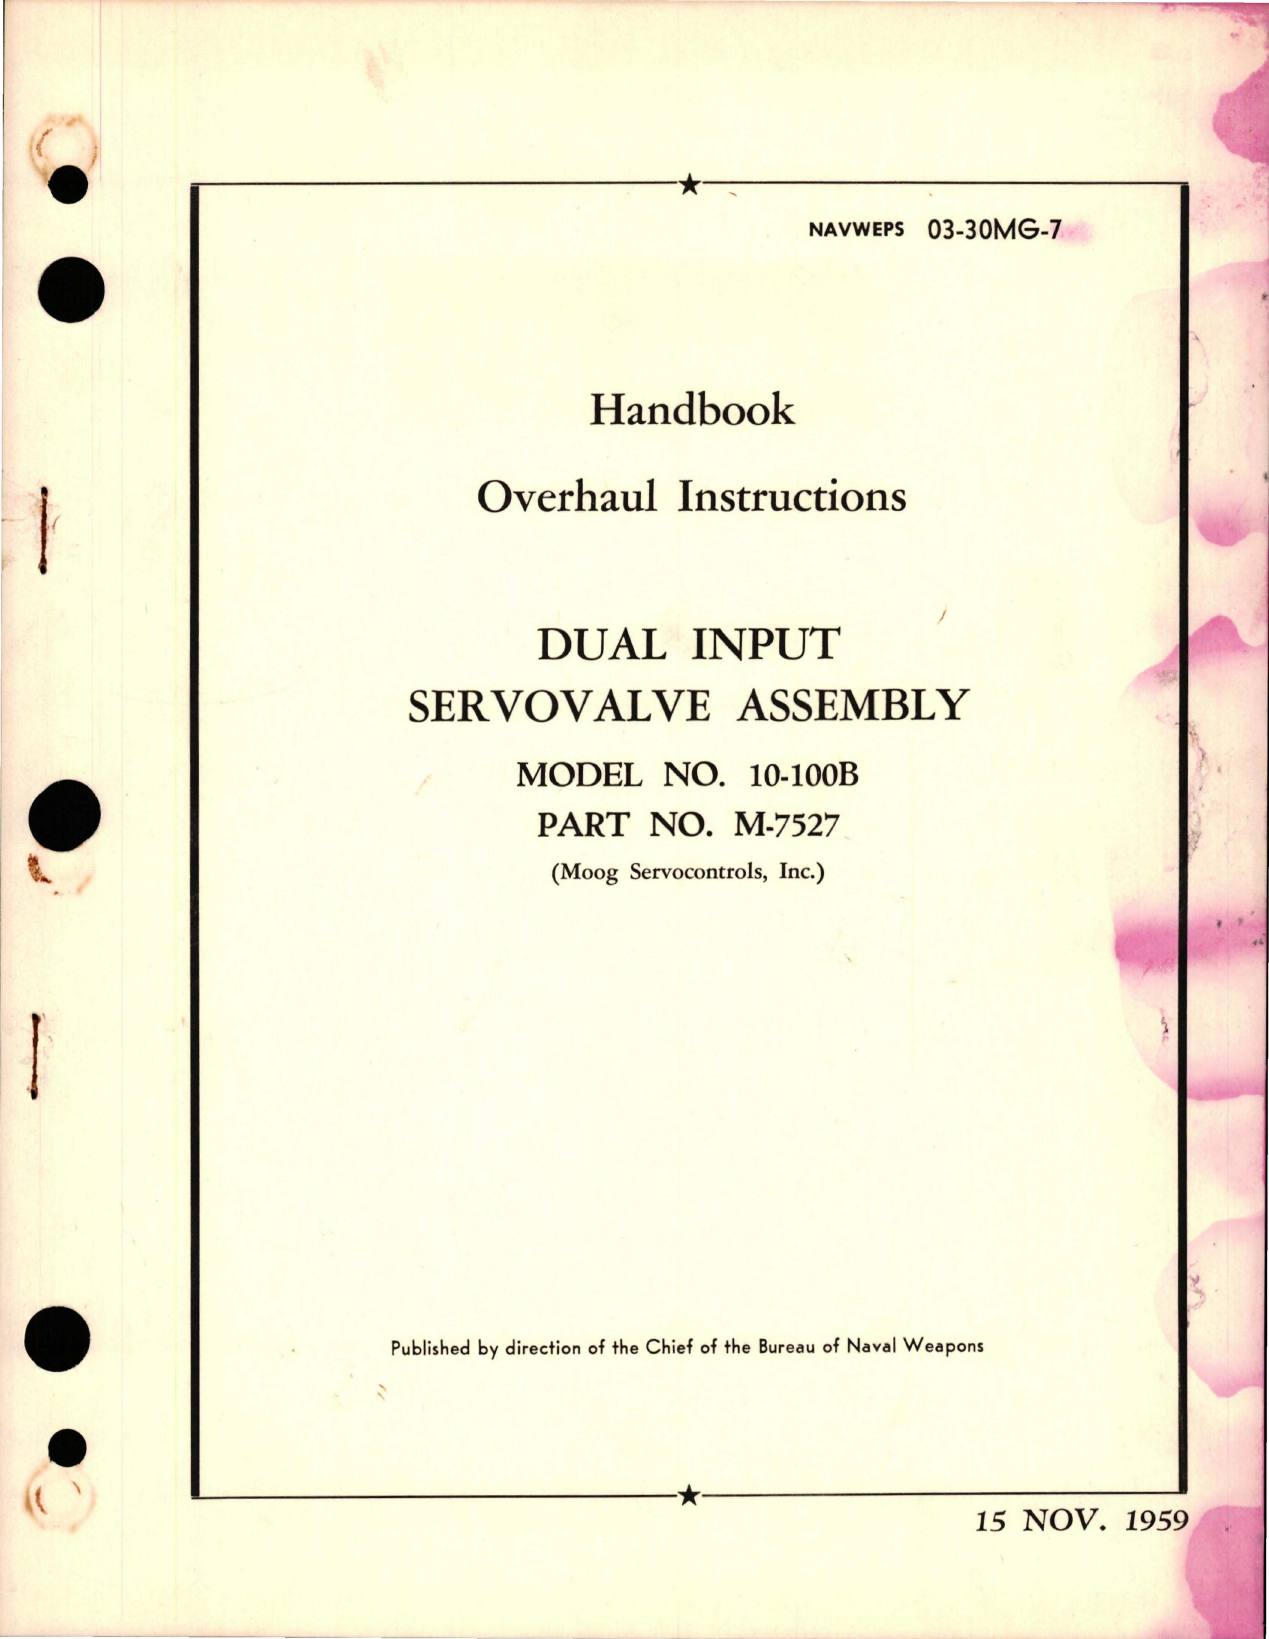 Sample page 1 from AirCorps Library document: Overhaul Instructions for Dual Input Servovalve Assembly - Model 10-100B - Part M-7527